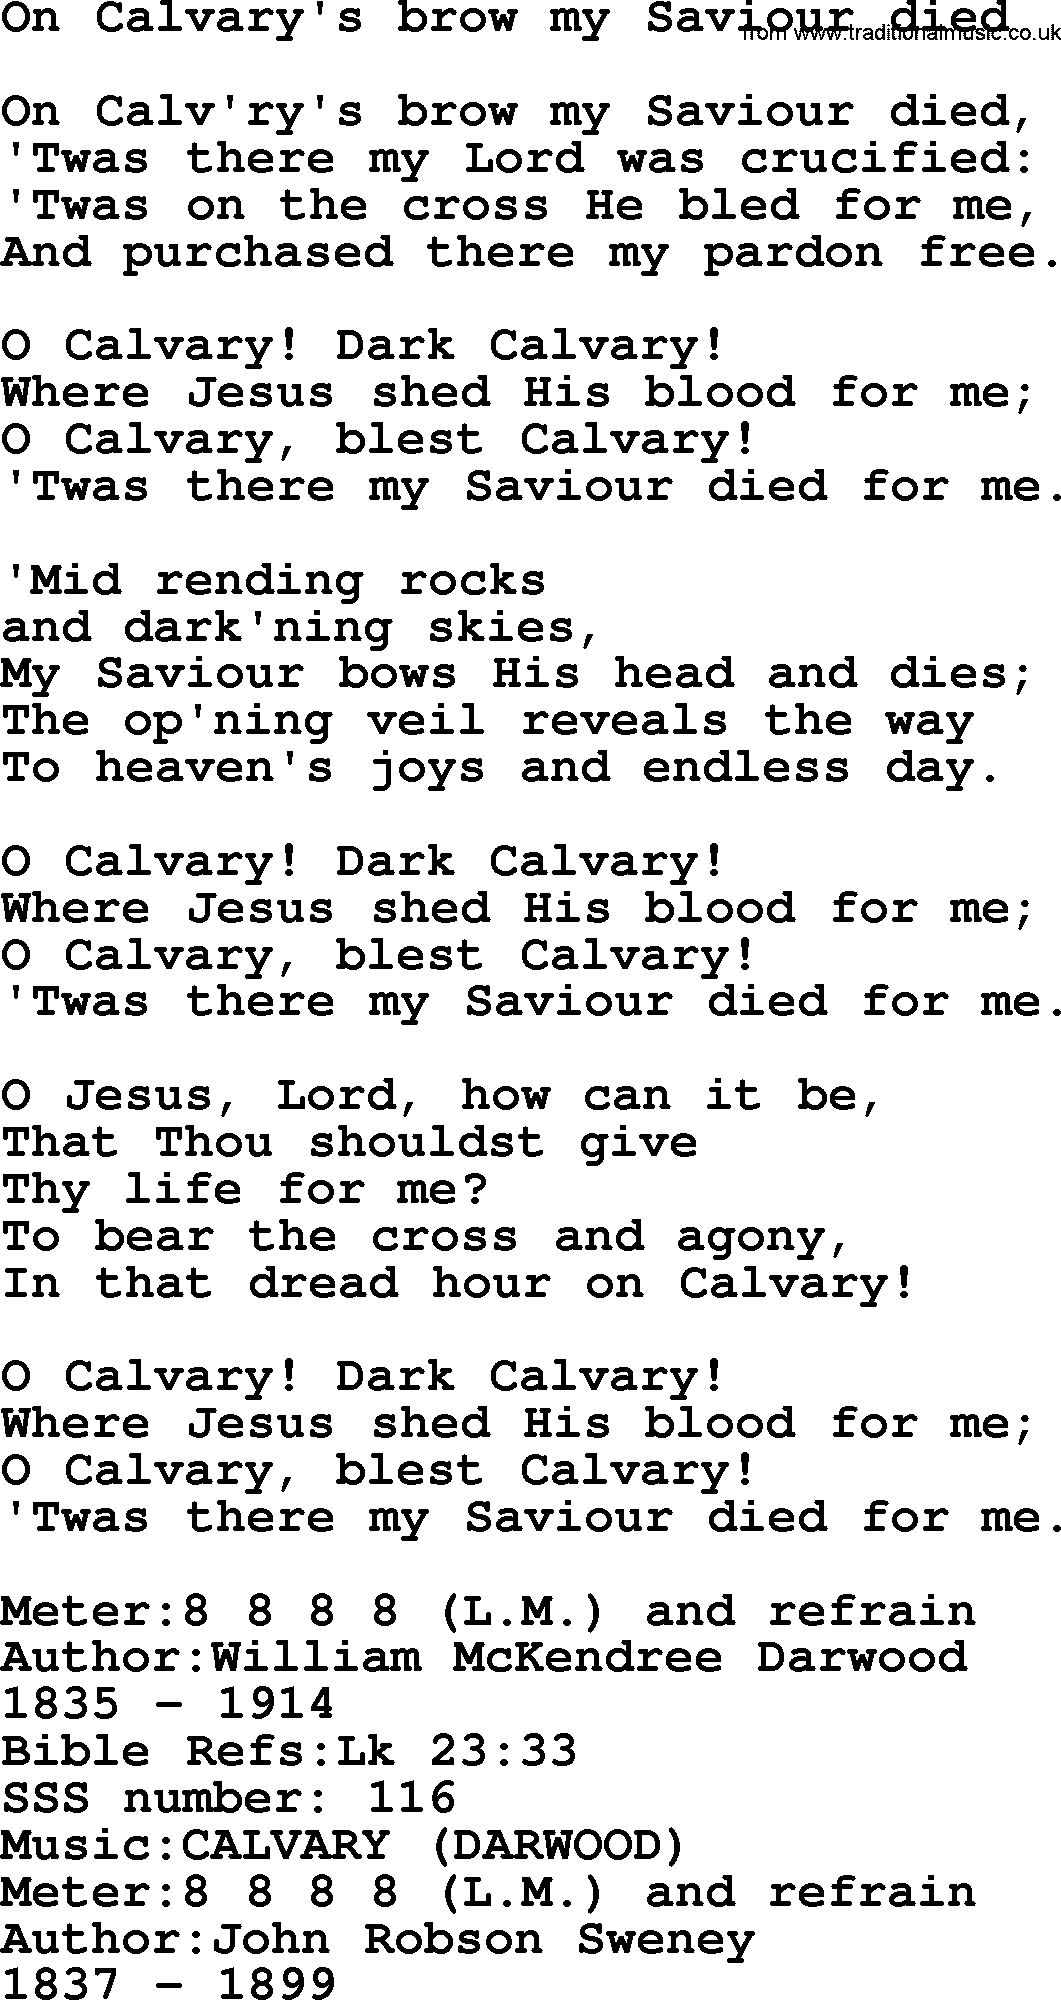 Sacred Songs and Solos complete, 1200 Hymns, title: On Calvary's Brow My Saviour Died, lyrics and PDF